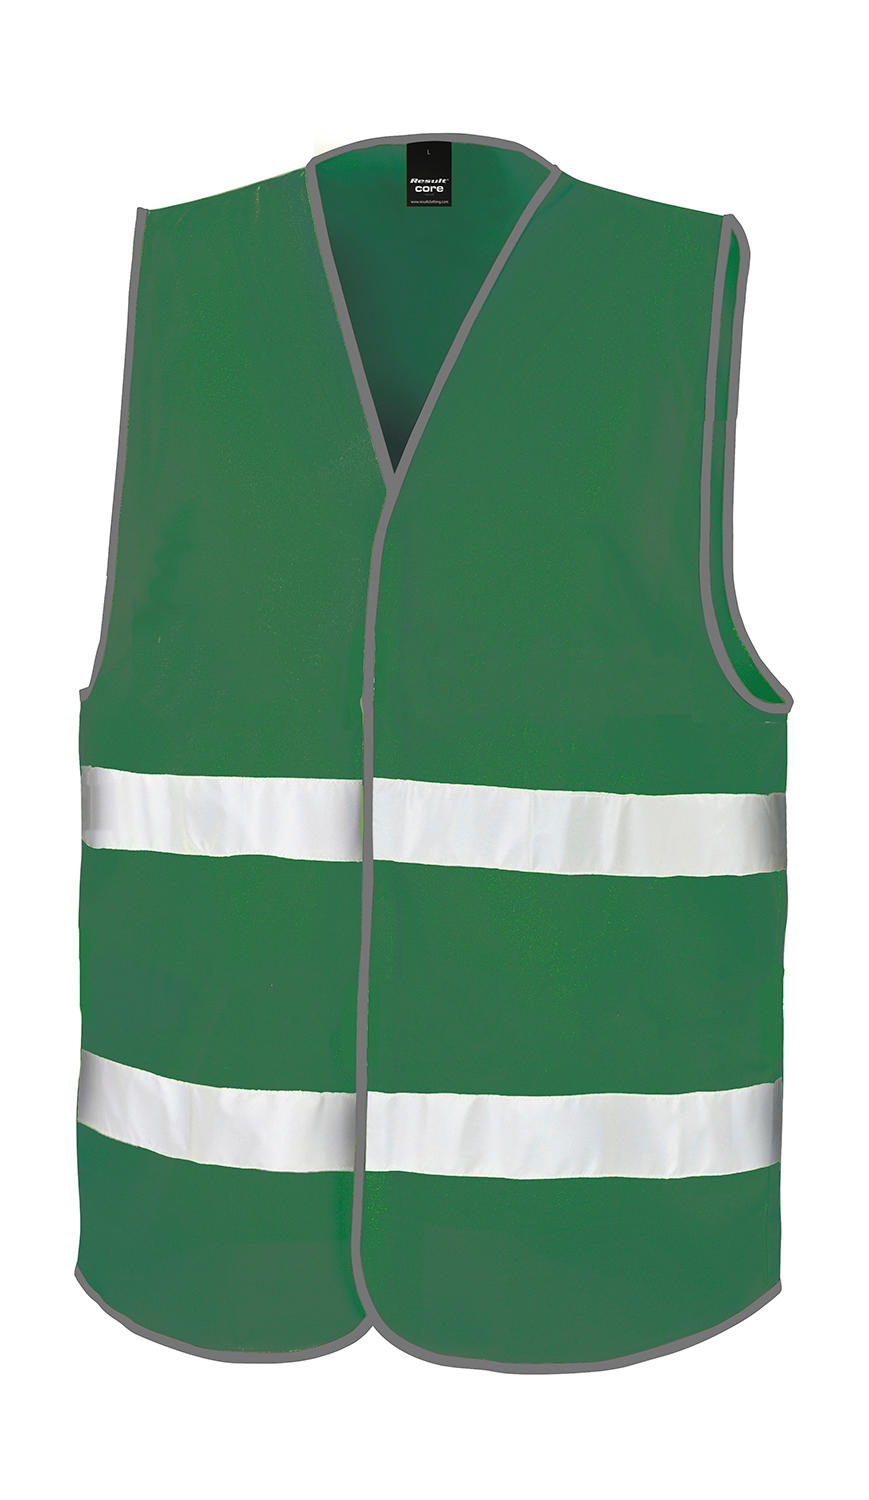  Core Enhanced Visibility Vest in Farbe Paramedic Green